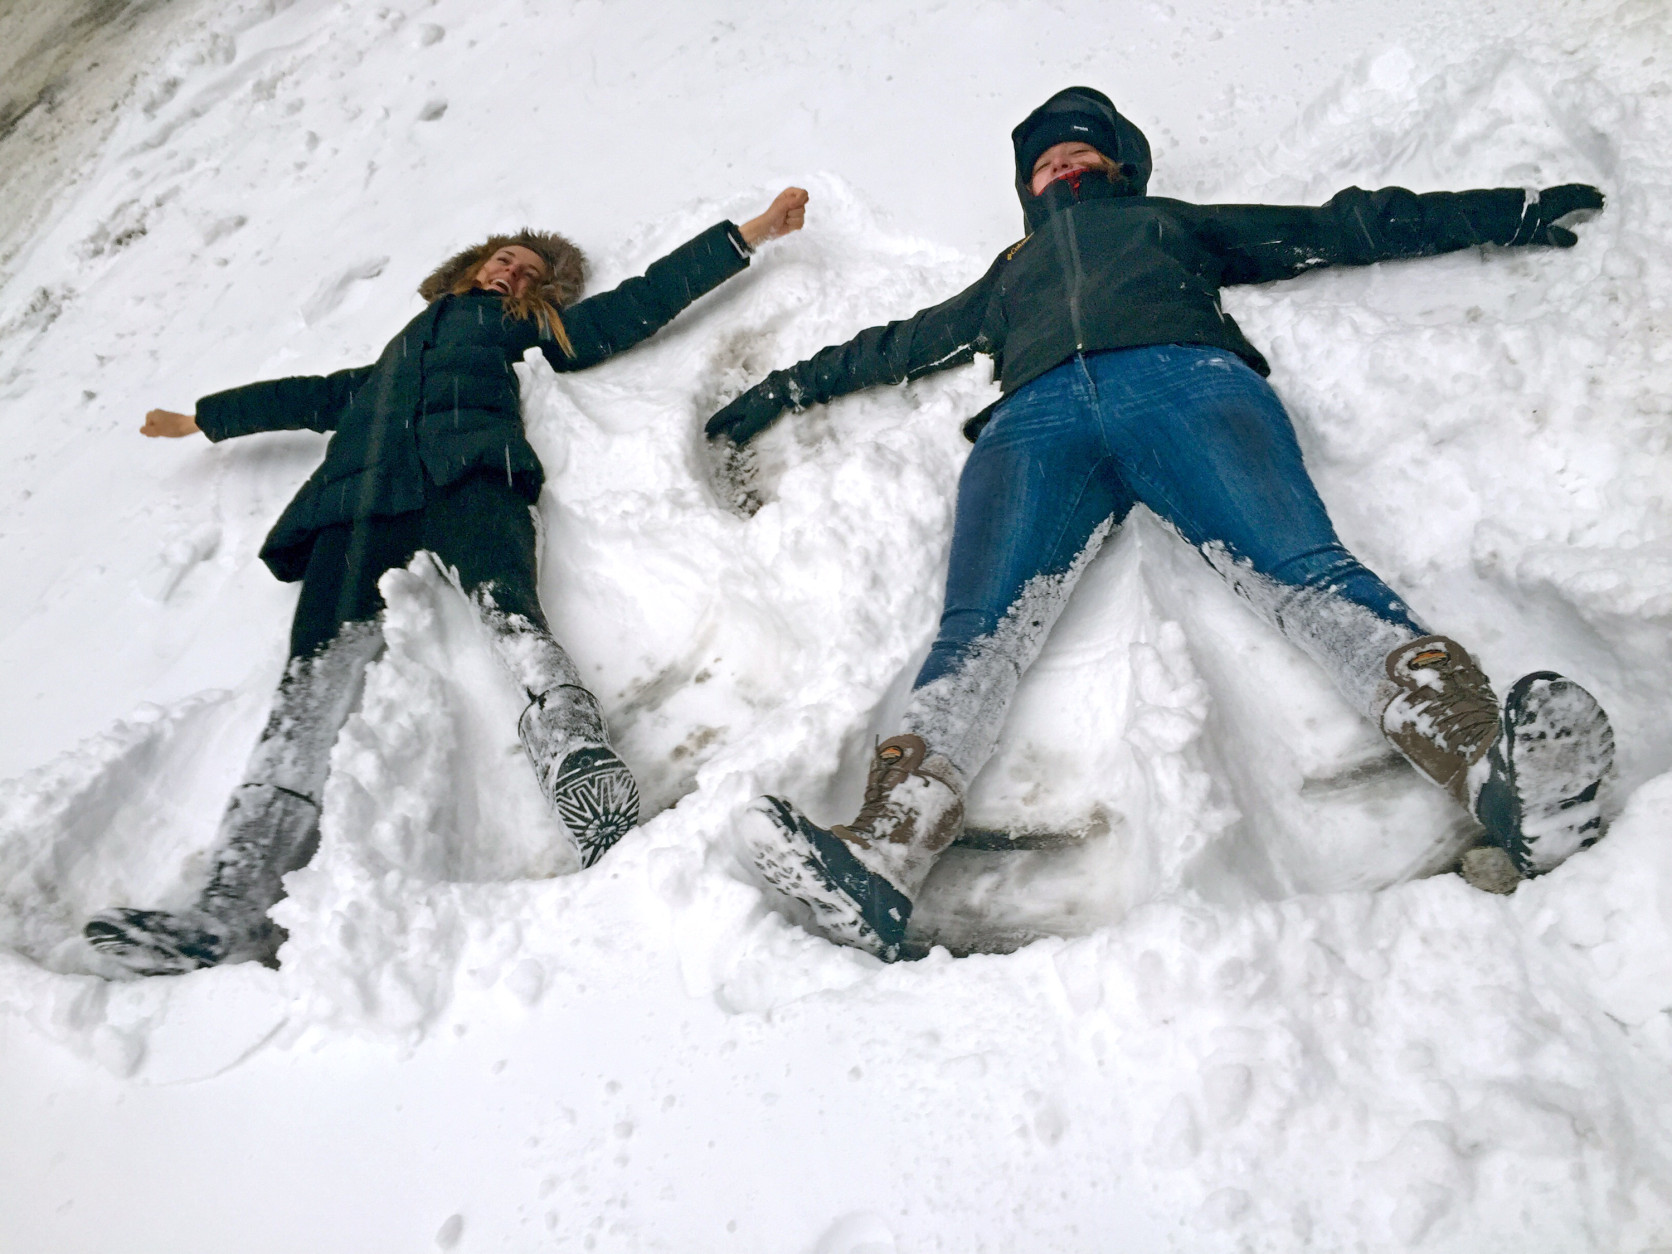 Bianca Hillier, left, of Columbus, Ohio, and Eloise Pollard of London take advantage of a snowtorm travel ban to do something they never envisioned: making snow angels on a normally busy stretch of Manhattans Tenth Avenue at West 34th Street in New York, Tuesday Jan. 27, 2015. A howling blizzard heaped snow on Boston, the rest of eastern Massachusetts and parts of Long Island on Tuesday, delivering wind gusts topping 75 mph, but it failed to live up to the hype farther south in Philadelphia and New York City, which canceled its travel ban in the morning amid better-than-expected weather conditions. (AP Photo/Jennifer Peltz)